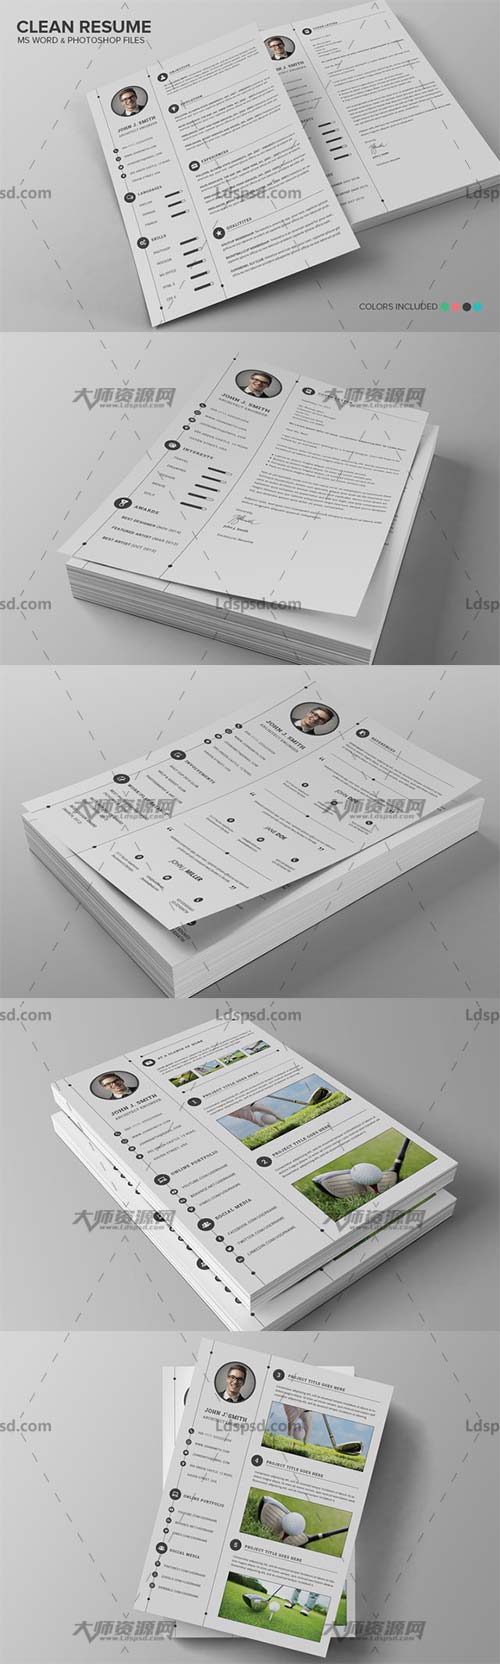 Smart & Clean Resume CV Set,个人简历模板(INDD/DOCX/PSD),个人简历模板(INDD/DOCX/PSD)